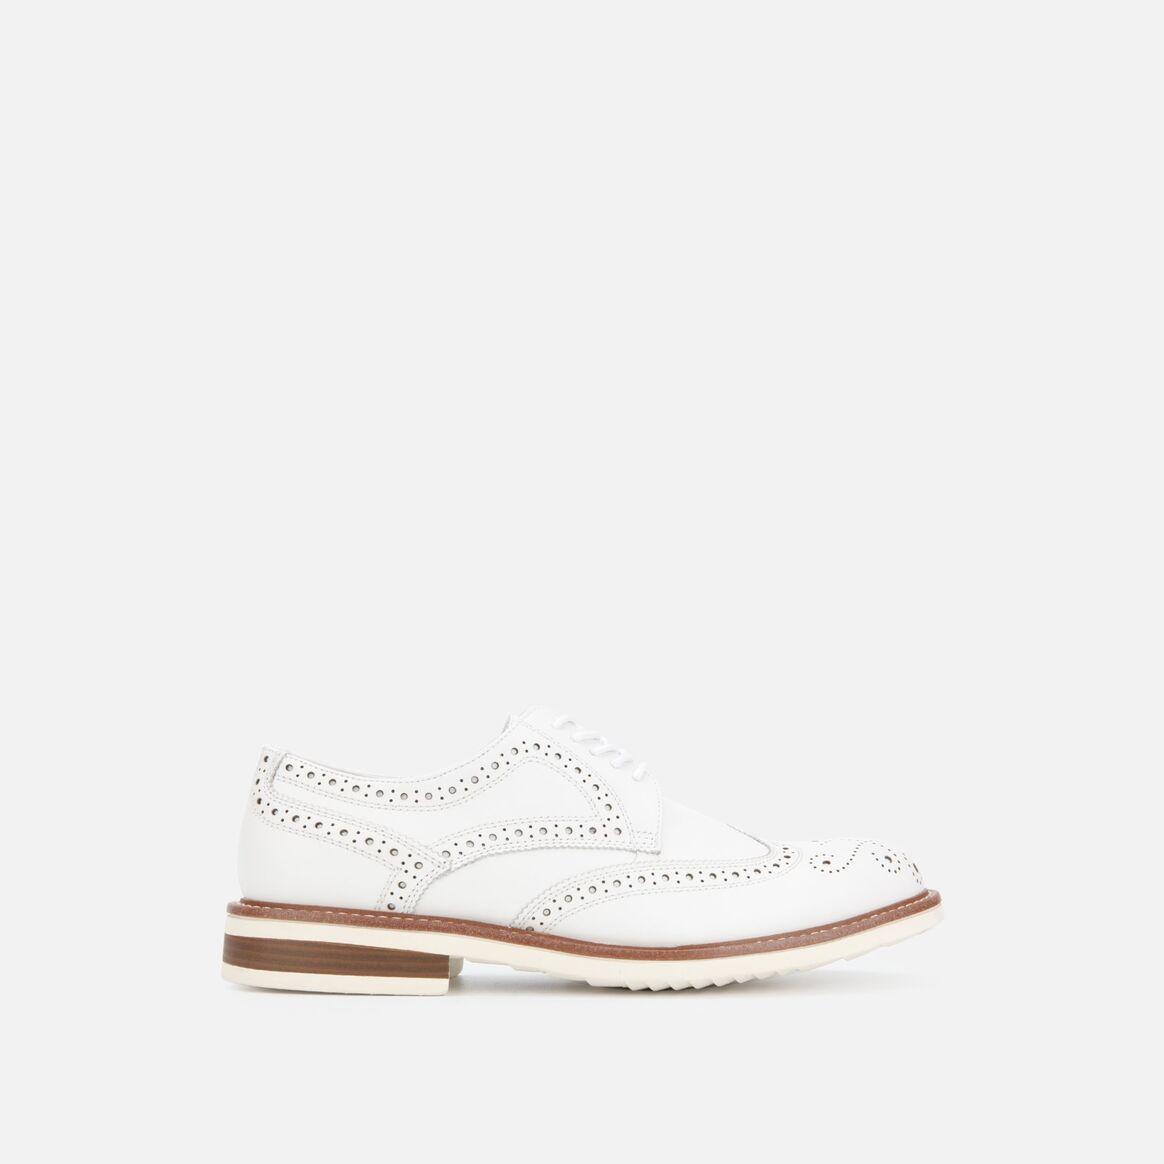 Kenneth Cole Leather Lace Up Oxford in White for Men - Save 1% - Lyst